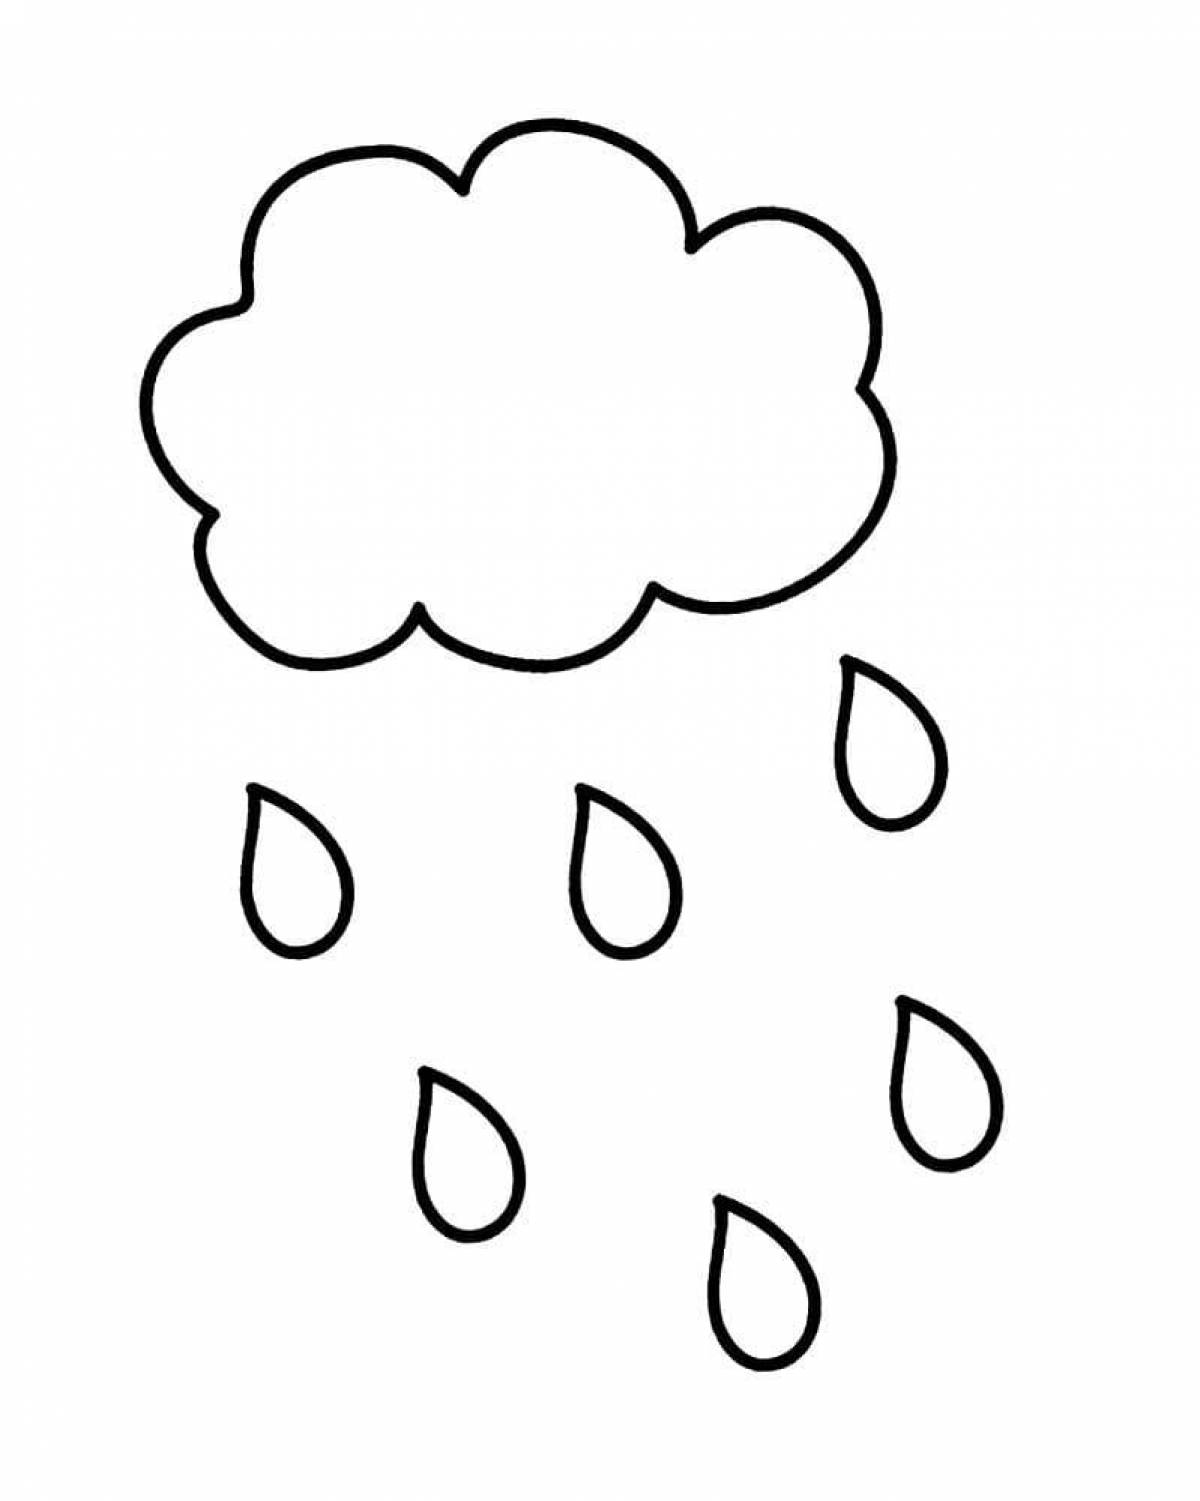 Coloring page fluffy gray cloud